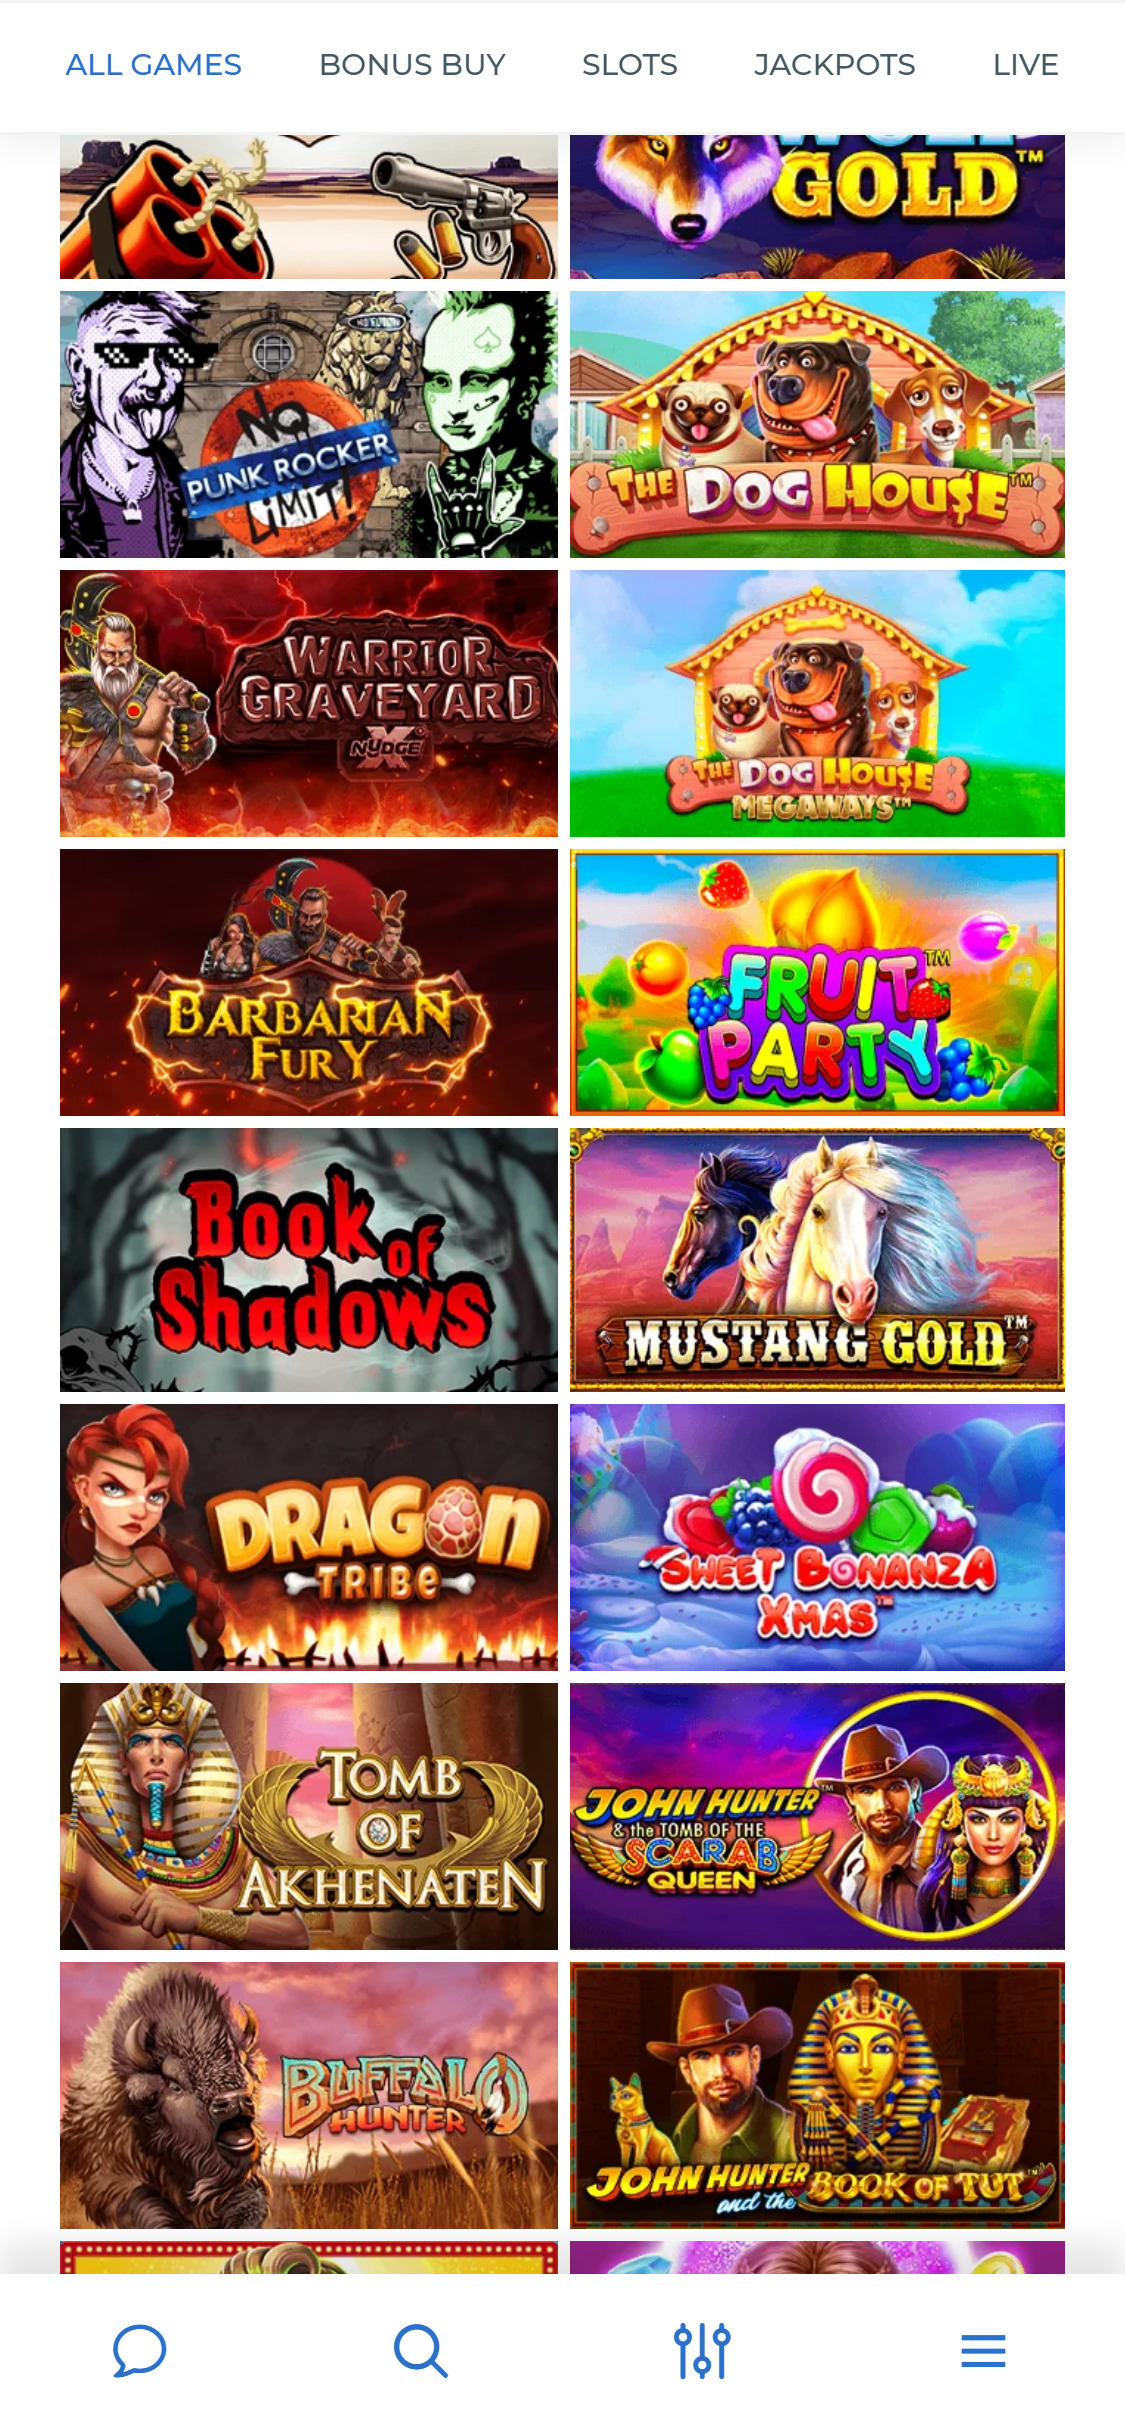 Surfcasino Mobile Games Review